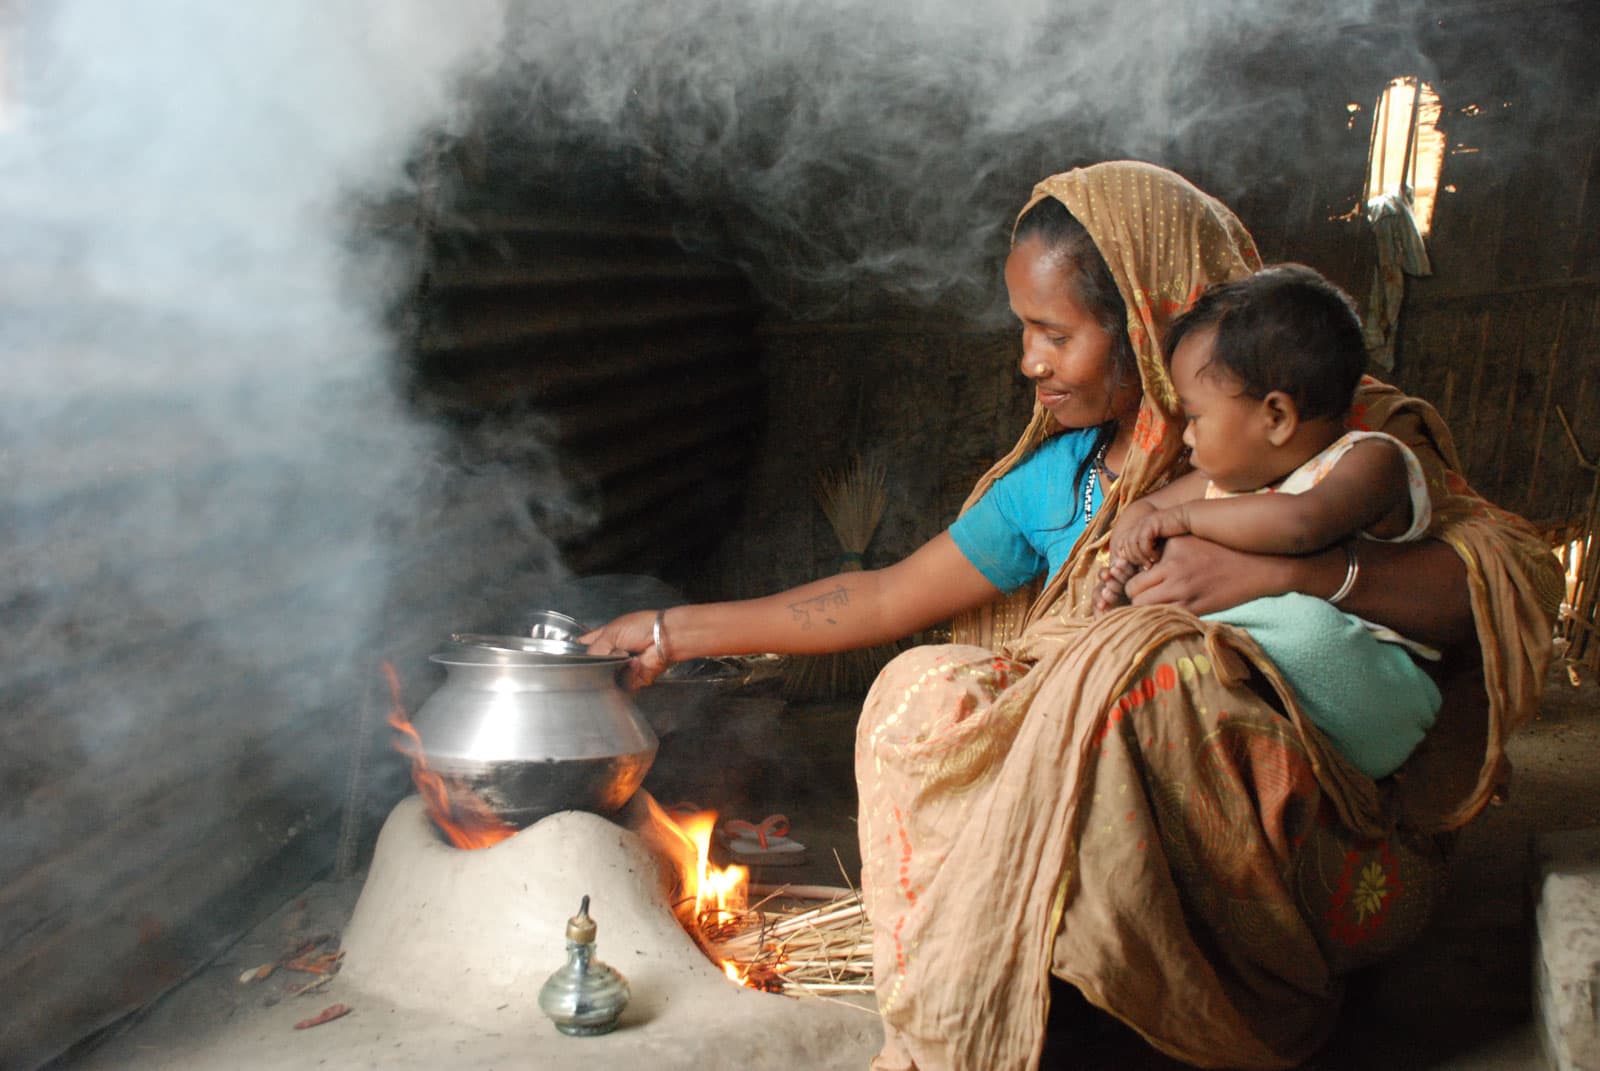 Woman sitting by a mud fire pit. She is holding her child in her arms, looking down as she holds a silver metal cooking pot over an open fire smoking stove cooking.